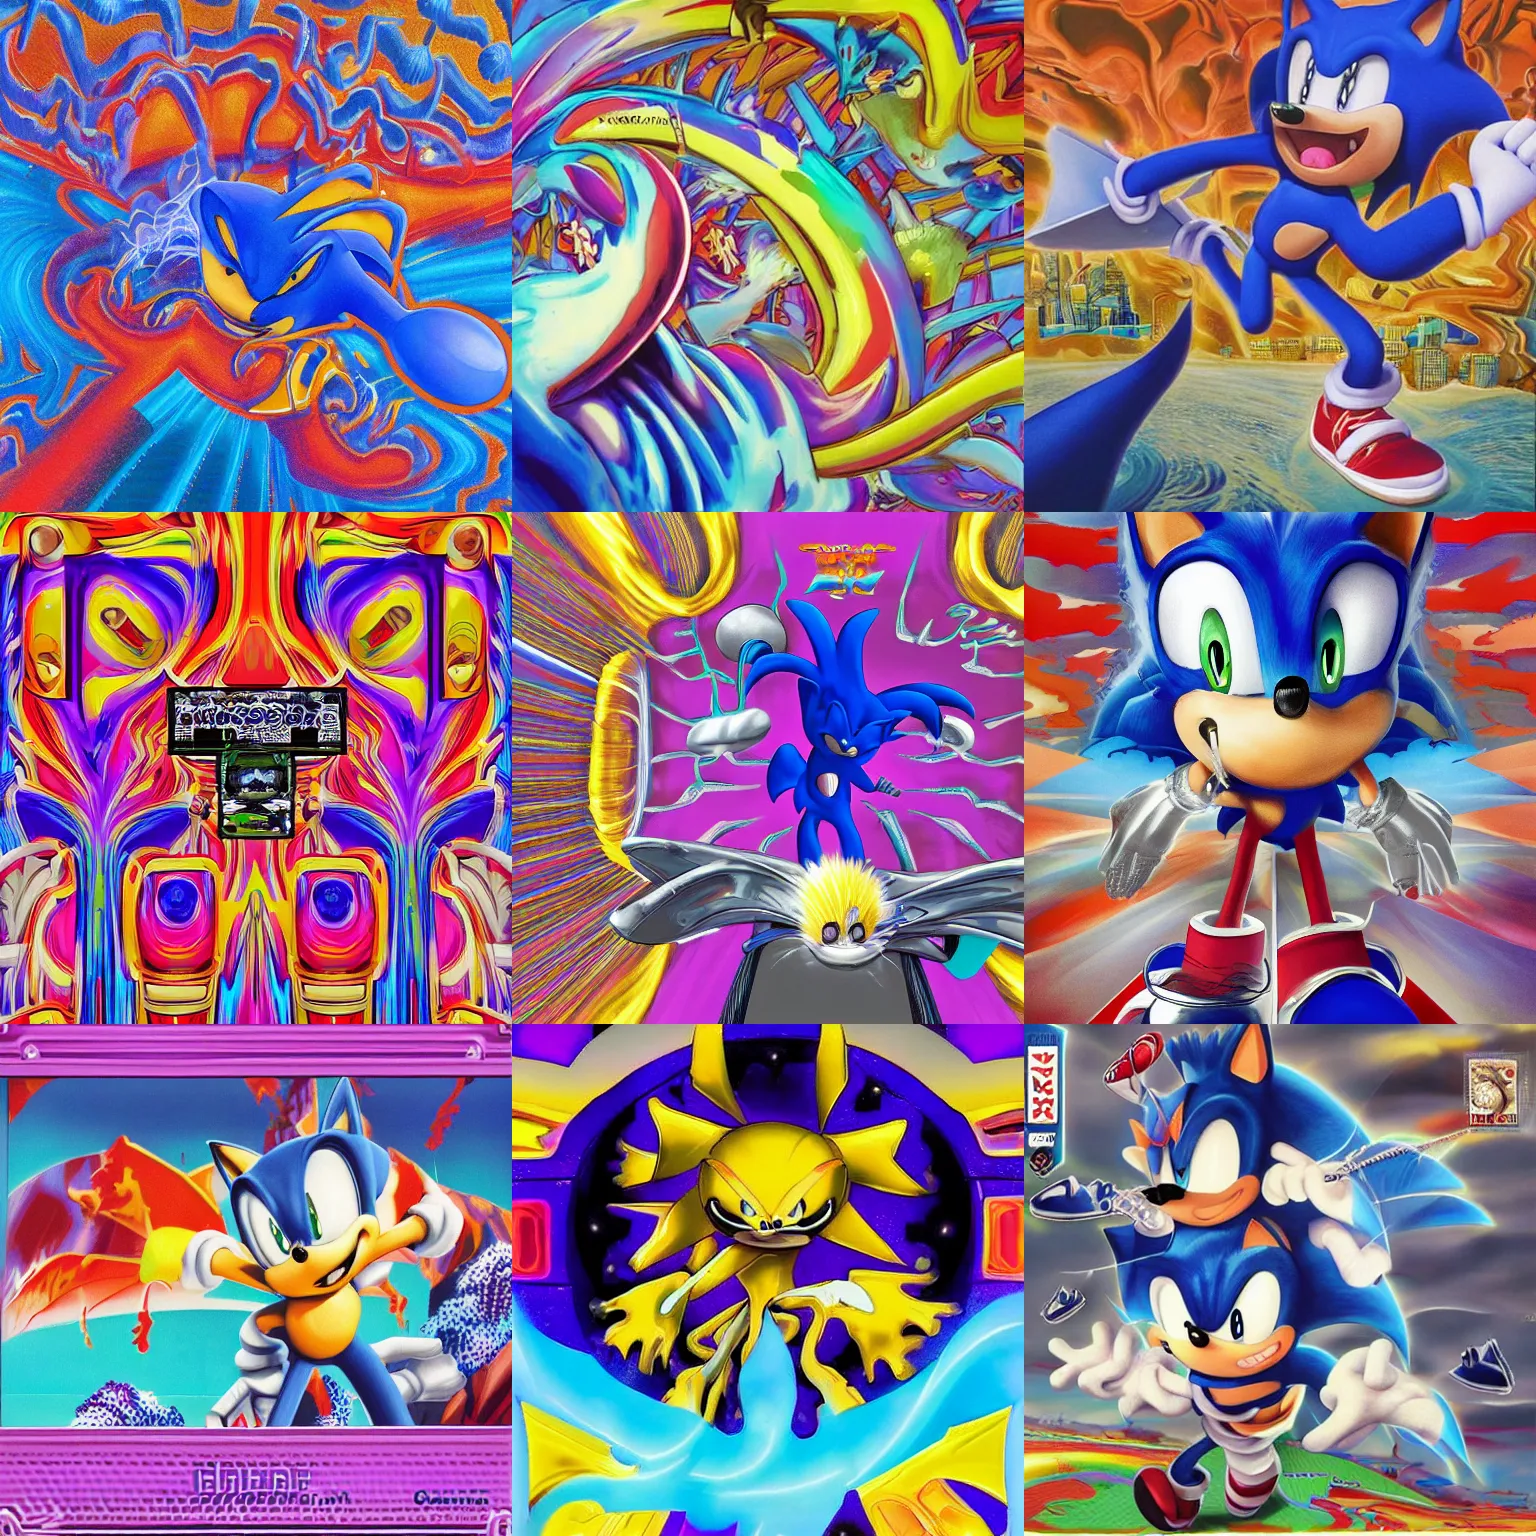 Prompt: portrait surreal sonic the hedgehog, recursive, sharp, detailed professional, high quality airbrush art MGMT album cover portrait of a liquid dissolving LSD DMT blue sonic the hedgehog surfing through a special stage, purple checkerboard background, 1990s 1992 Sega Genesis video game album cover